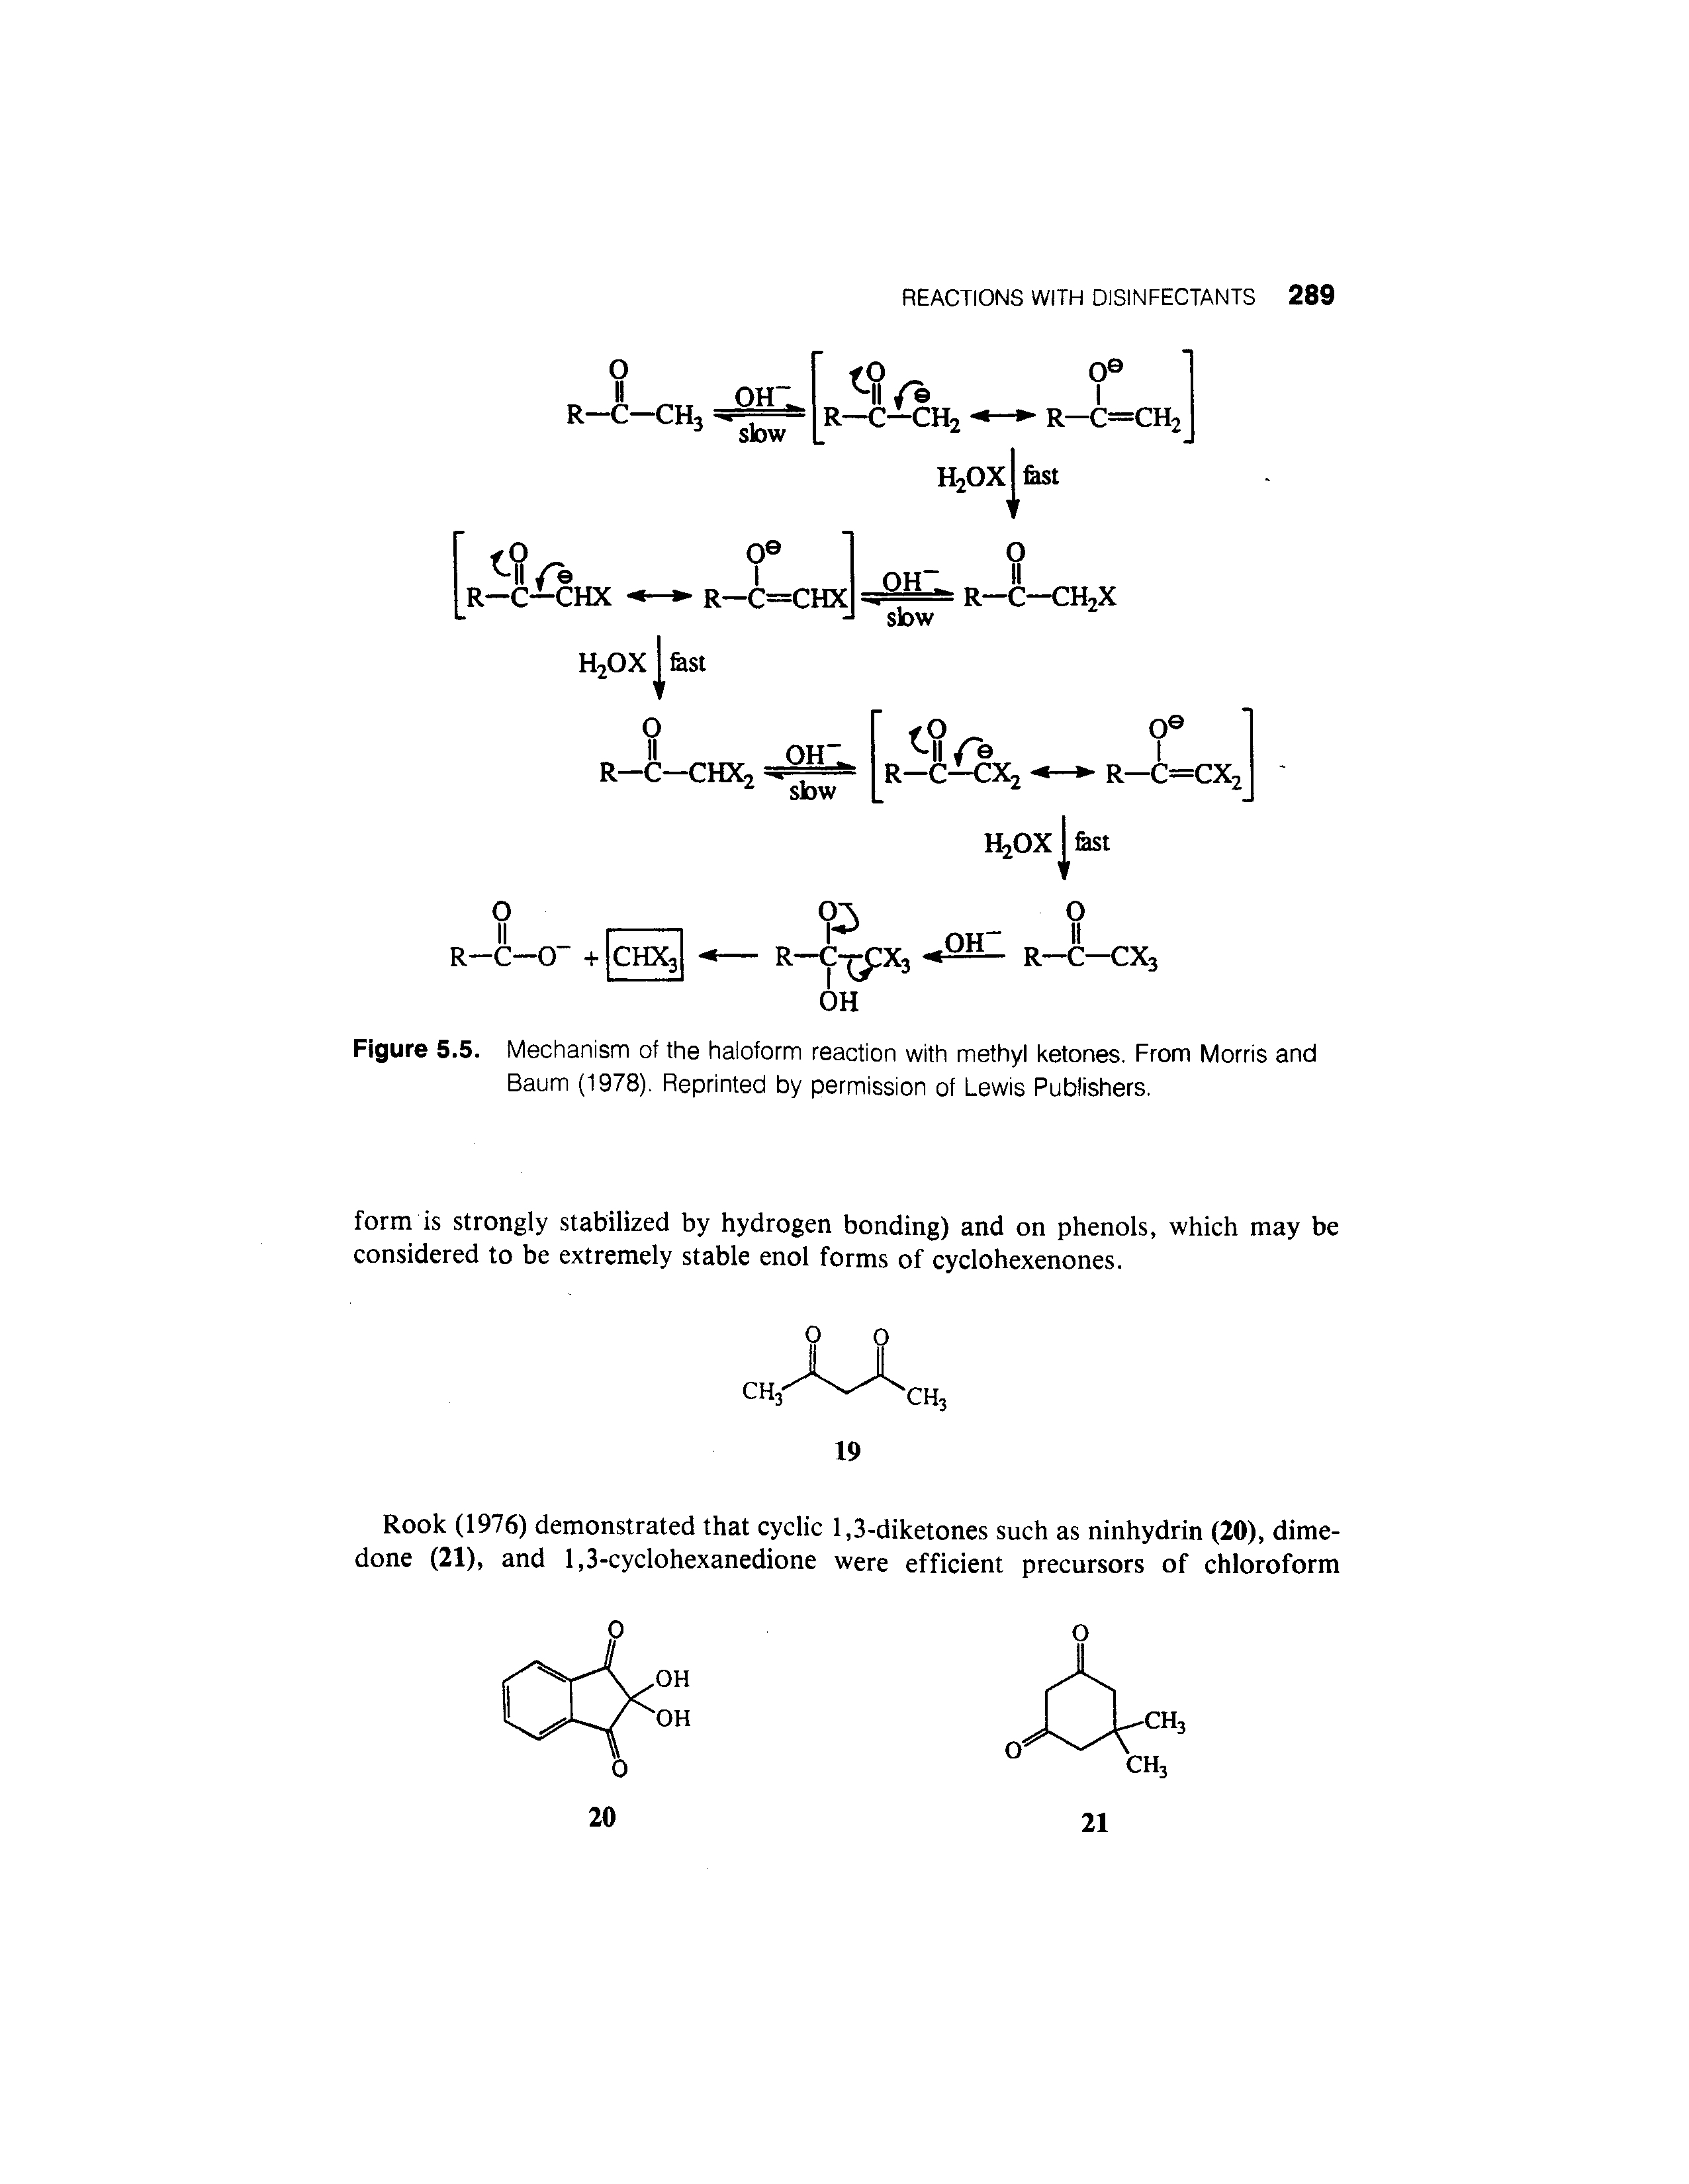 Figure 5.5. Mechanism of the haloform reaction with methyl ketones. From Morris and Baum (1978). Reprinted by permission of Lewis Publishers.